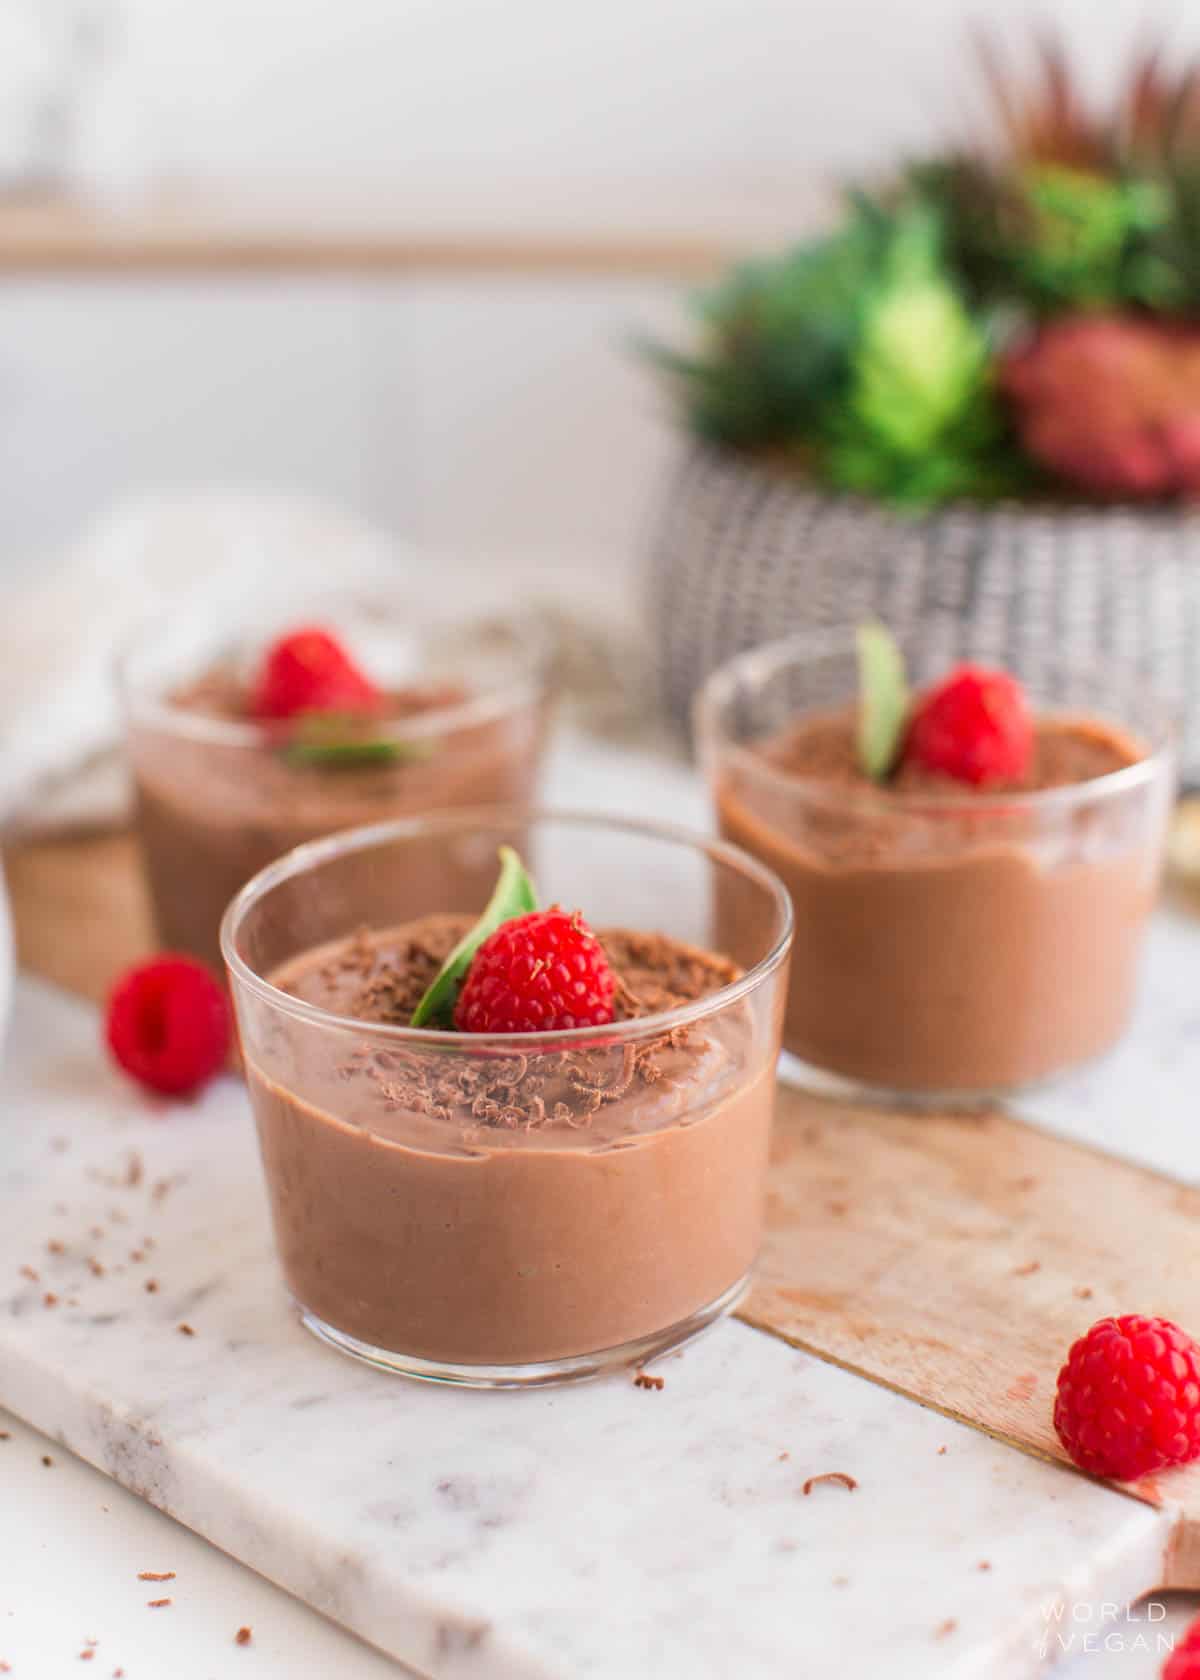 Vegan mousse jars topped with chocolate shavings and raspberries.